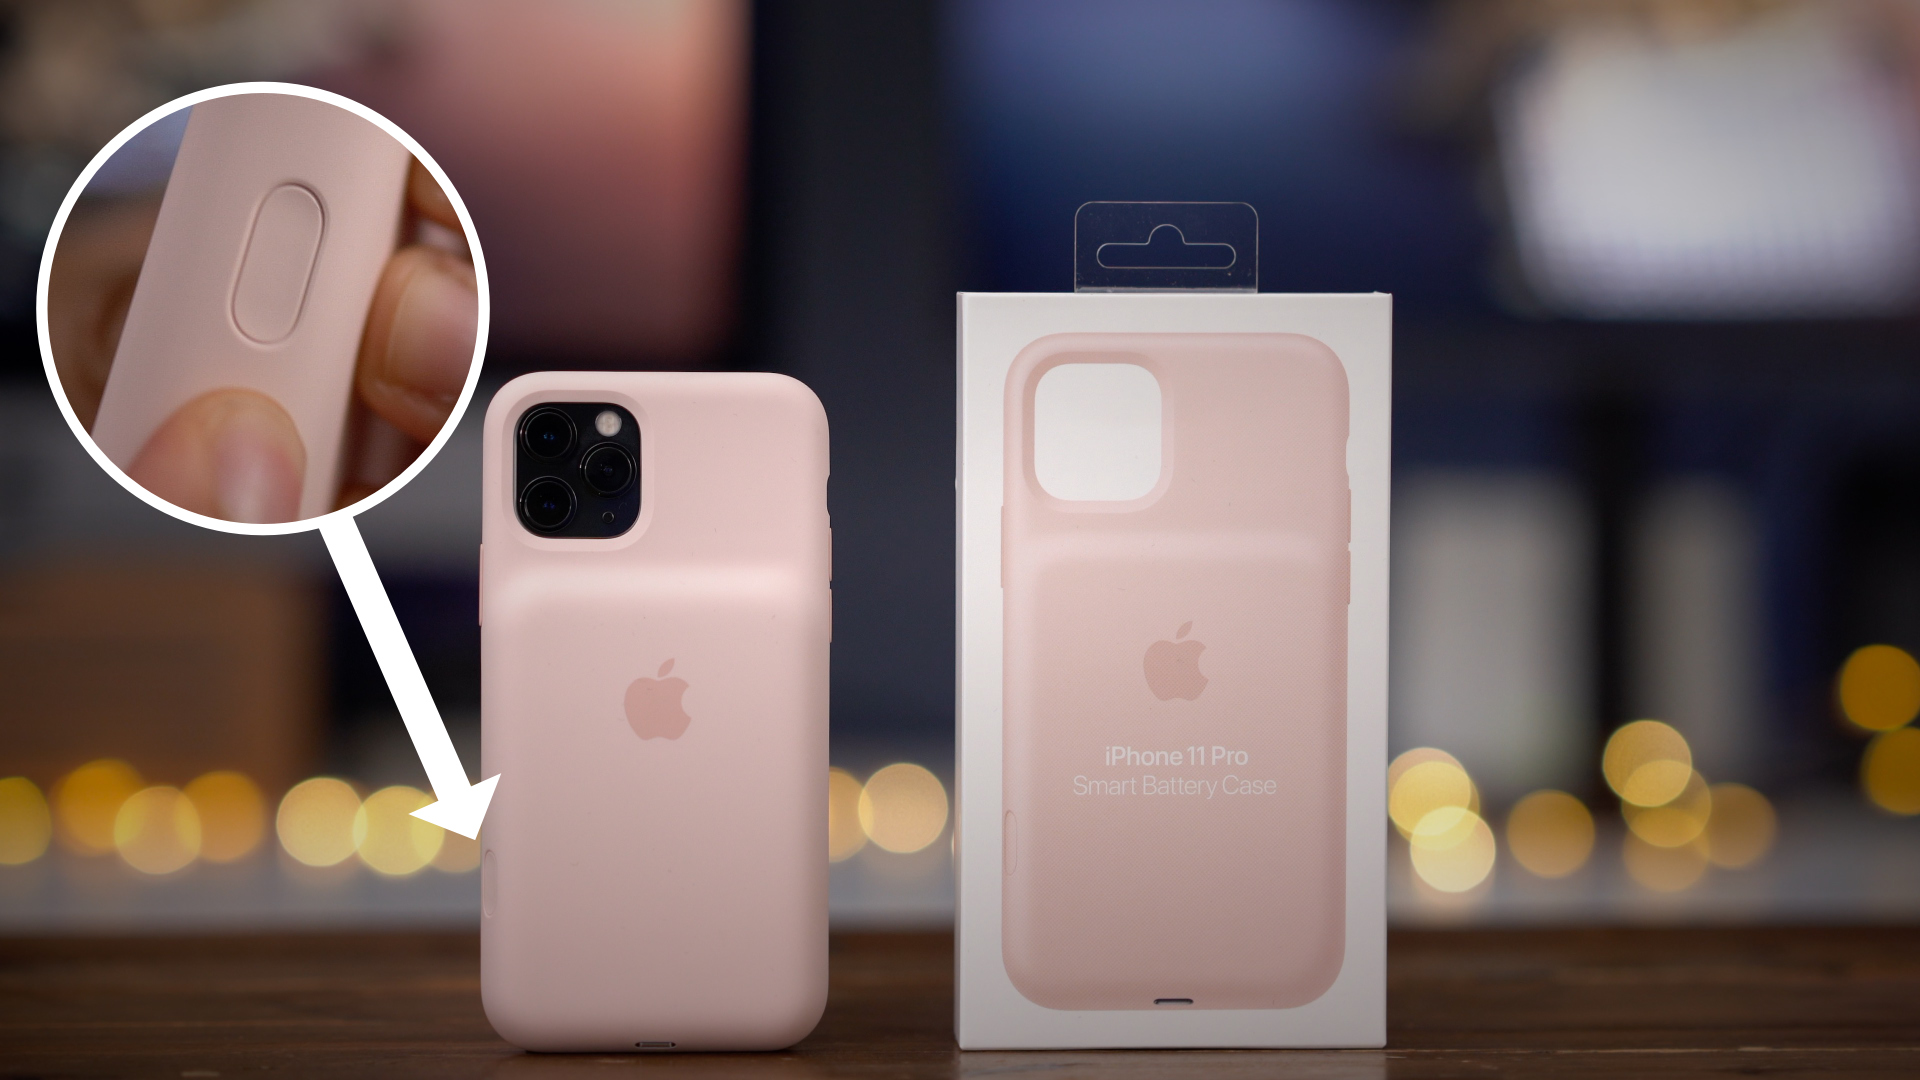 Apple Smart Battery Case for iPhone 11, 11 Pro and 11 Pro Max Review